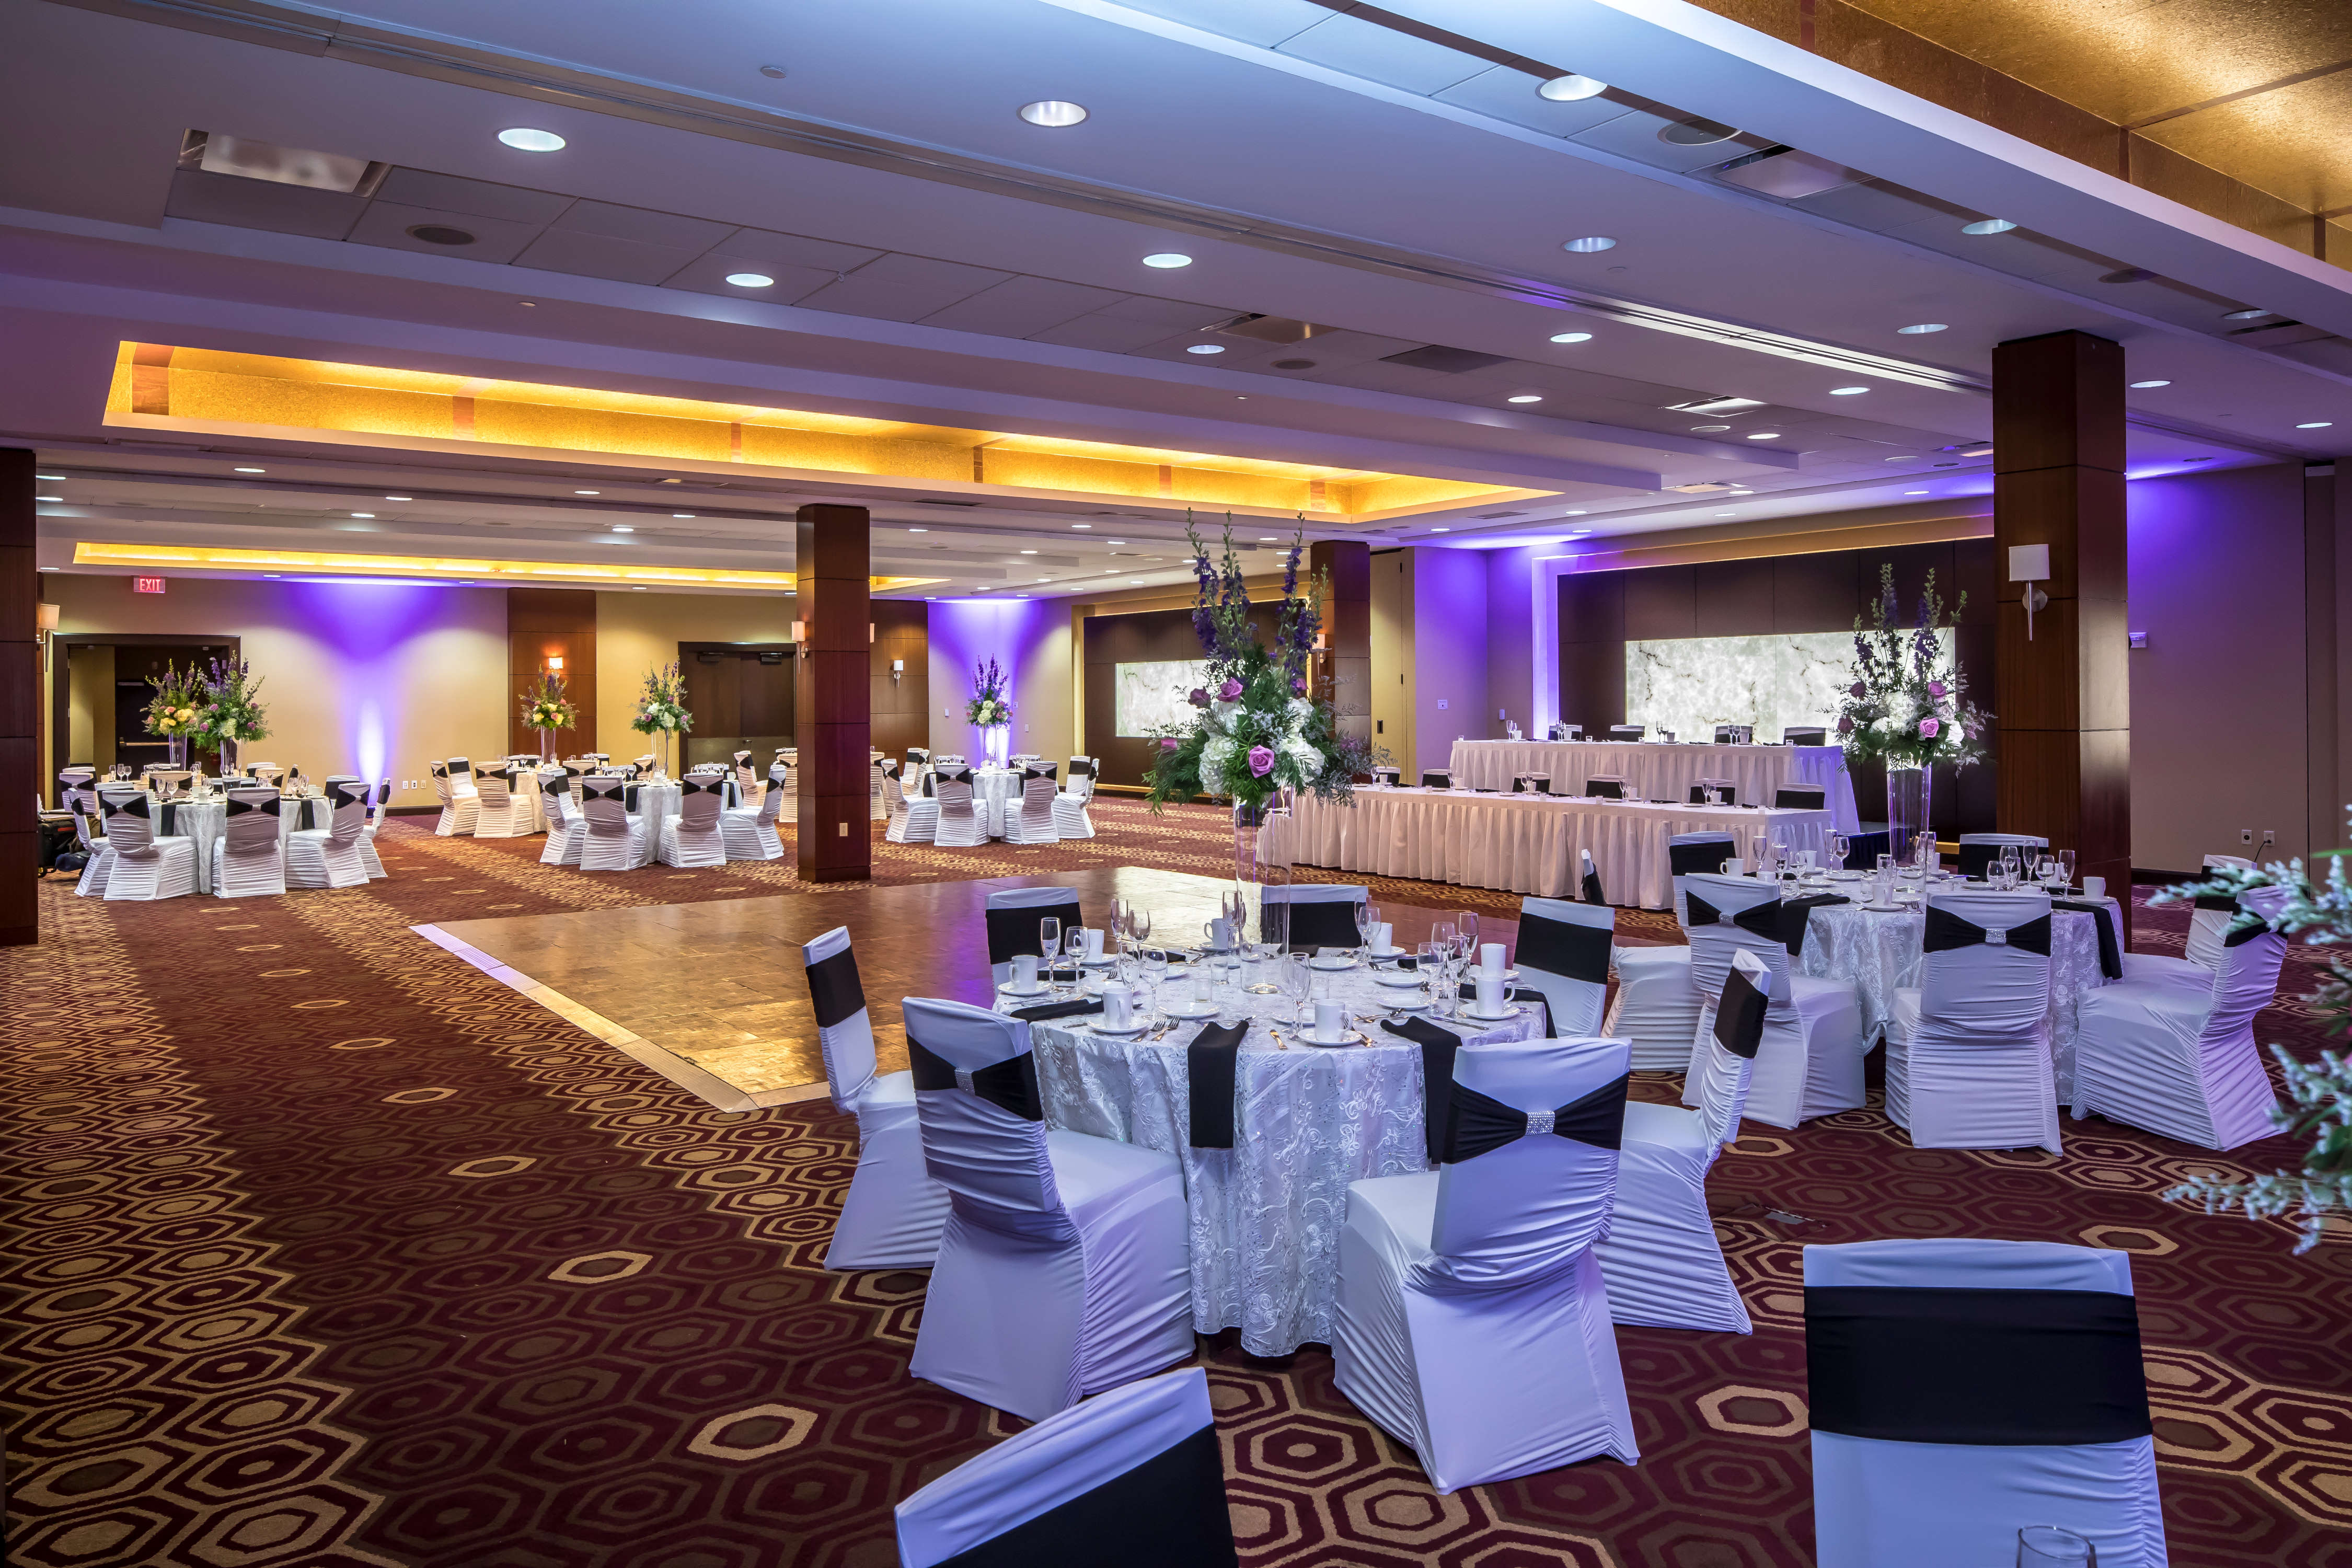 Dance Floor Surrounded by Banquet Tables With Place Settings, Flowers, Drinking Glasses, and White Linens, White Chairs With Black Sashes, Two Head Tables, and Purple Lighting in Ballroom Set Up For Wedding